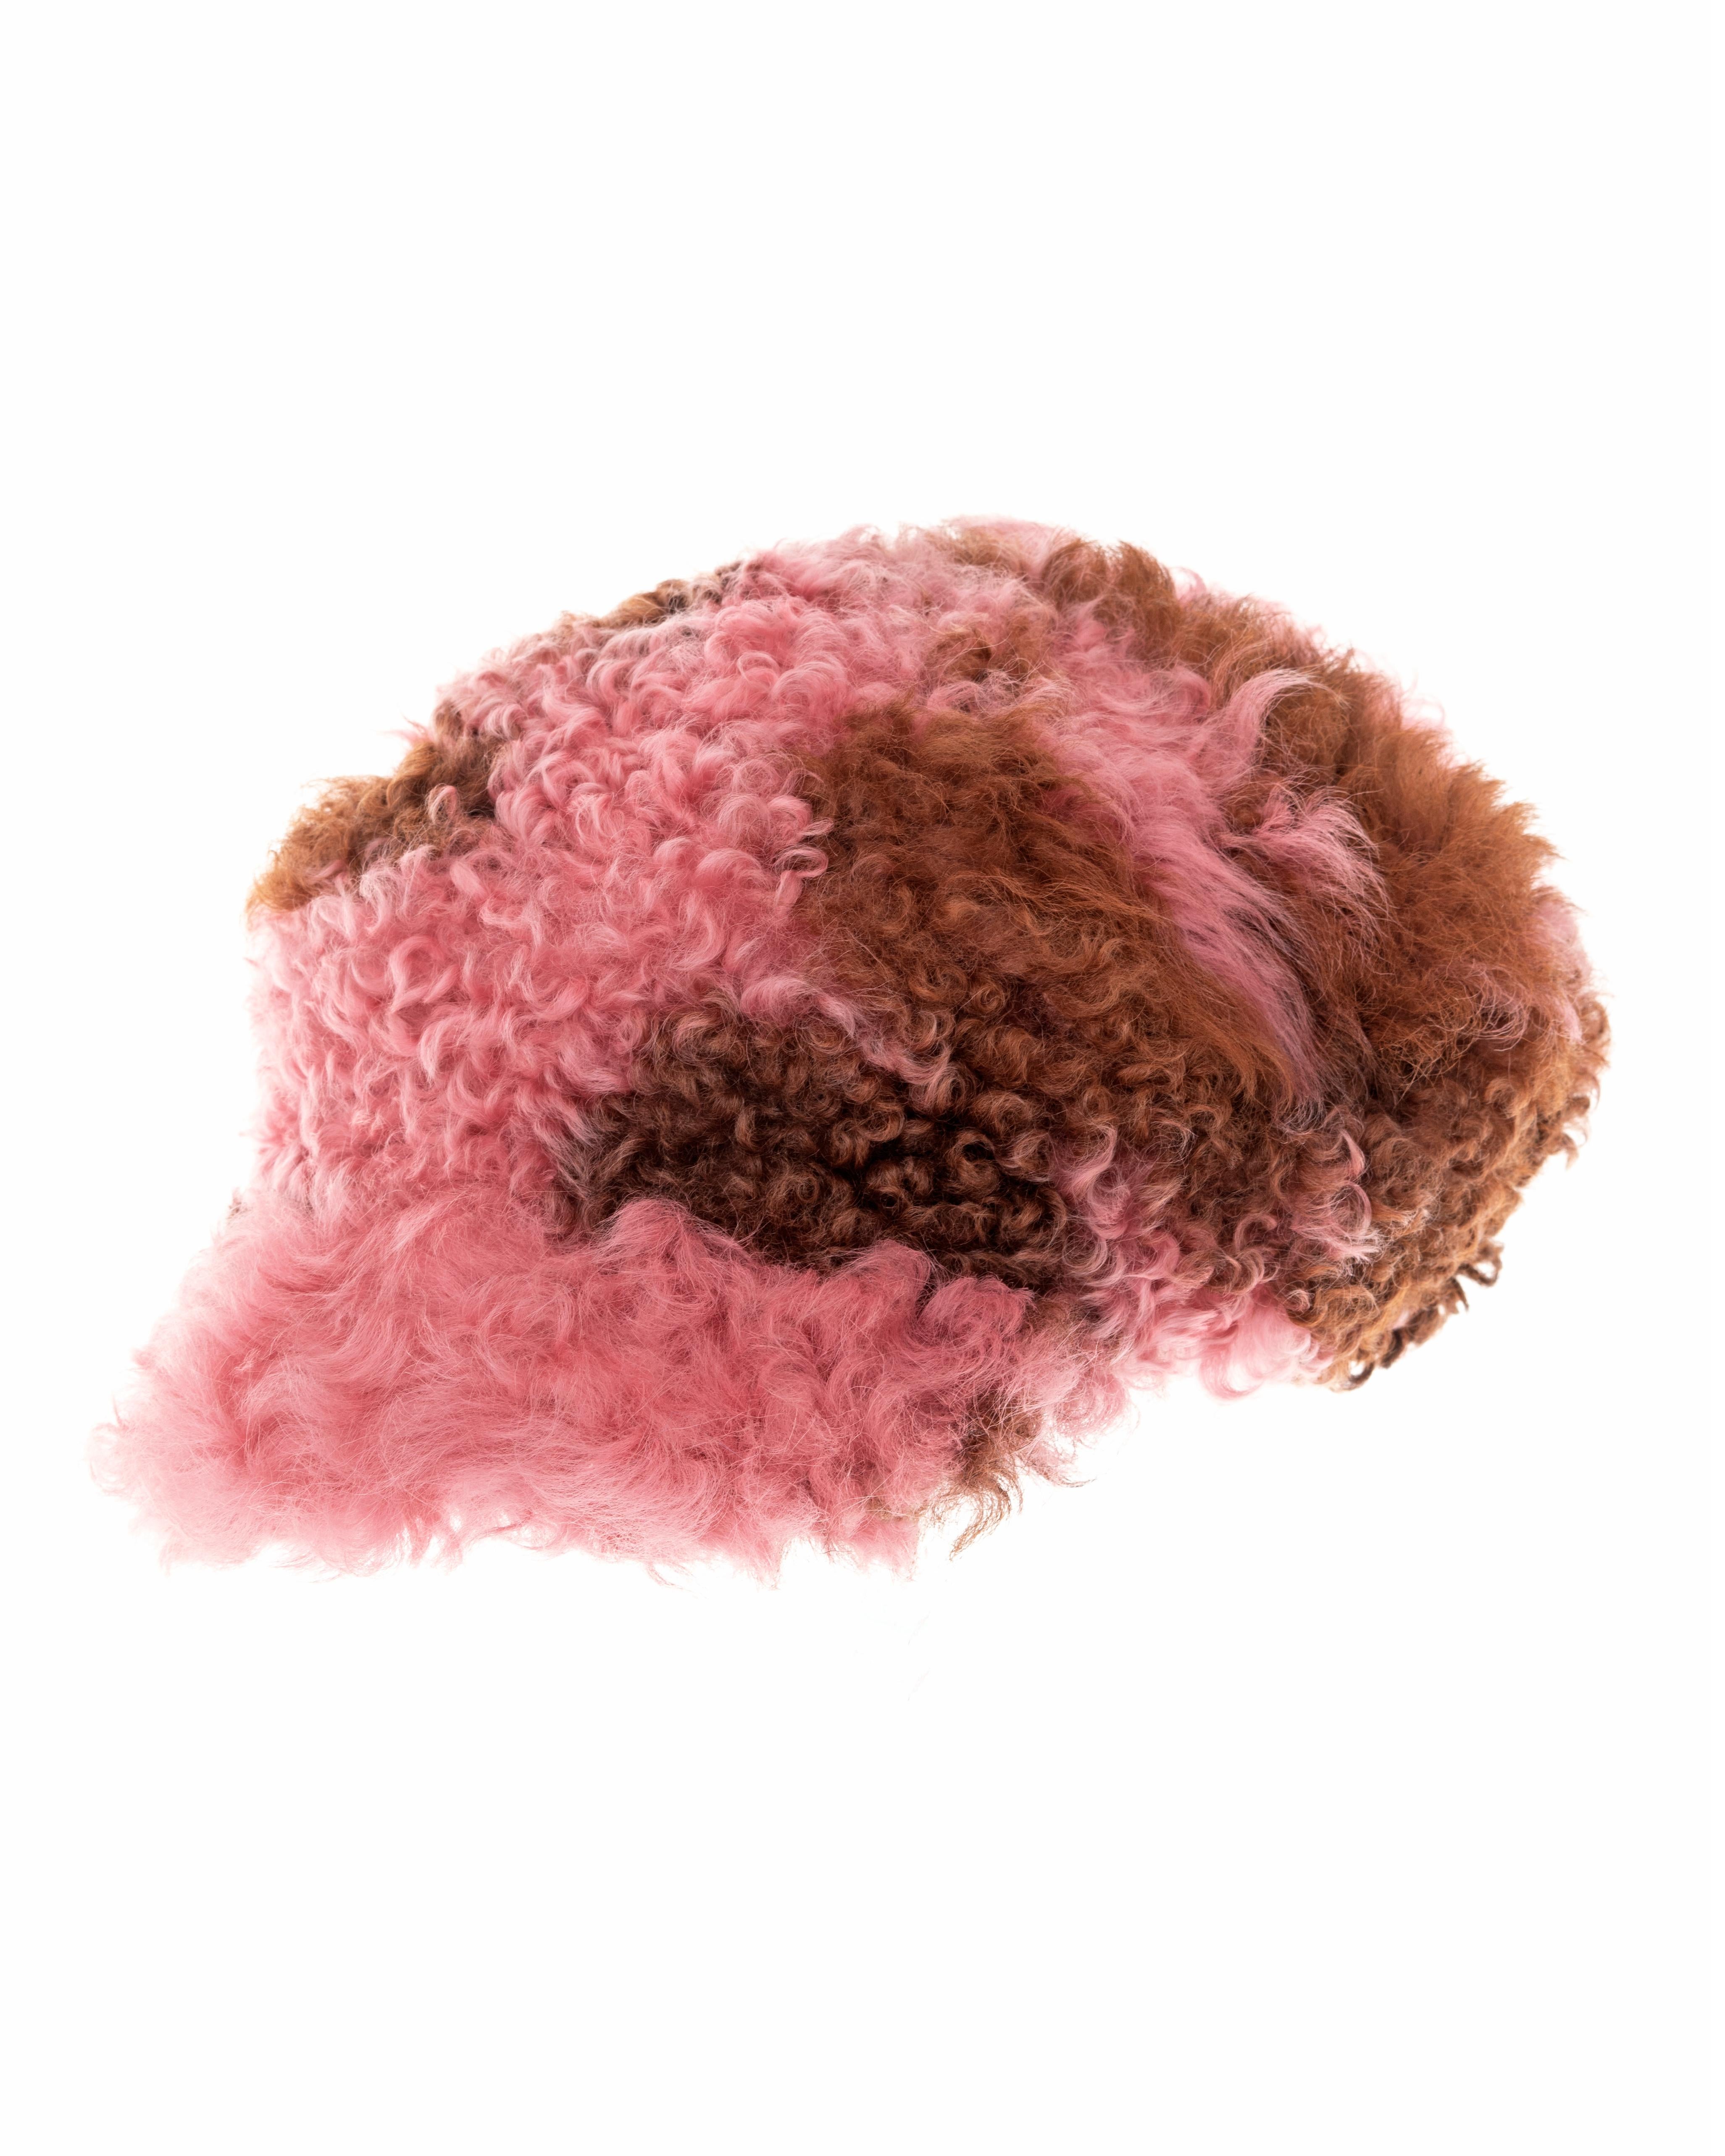 Prada pink and brown curly shearling 'newsboy' hat, fw 2017 2